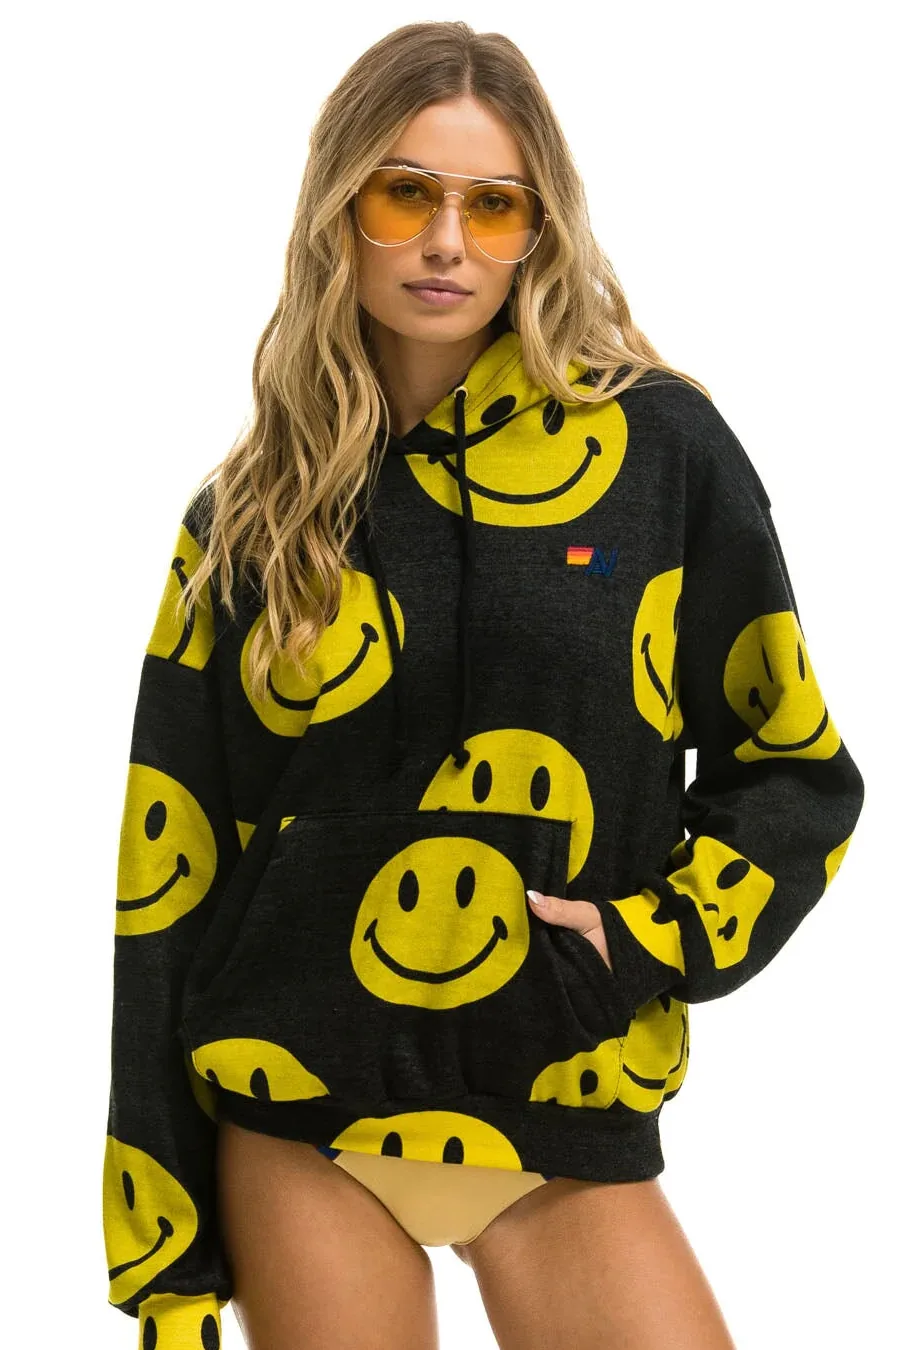 Aviator Nation Smiley Face Hoodie